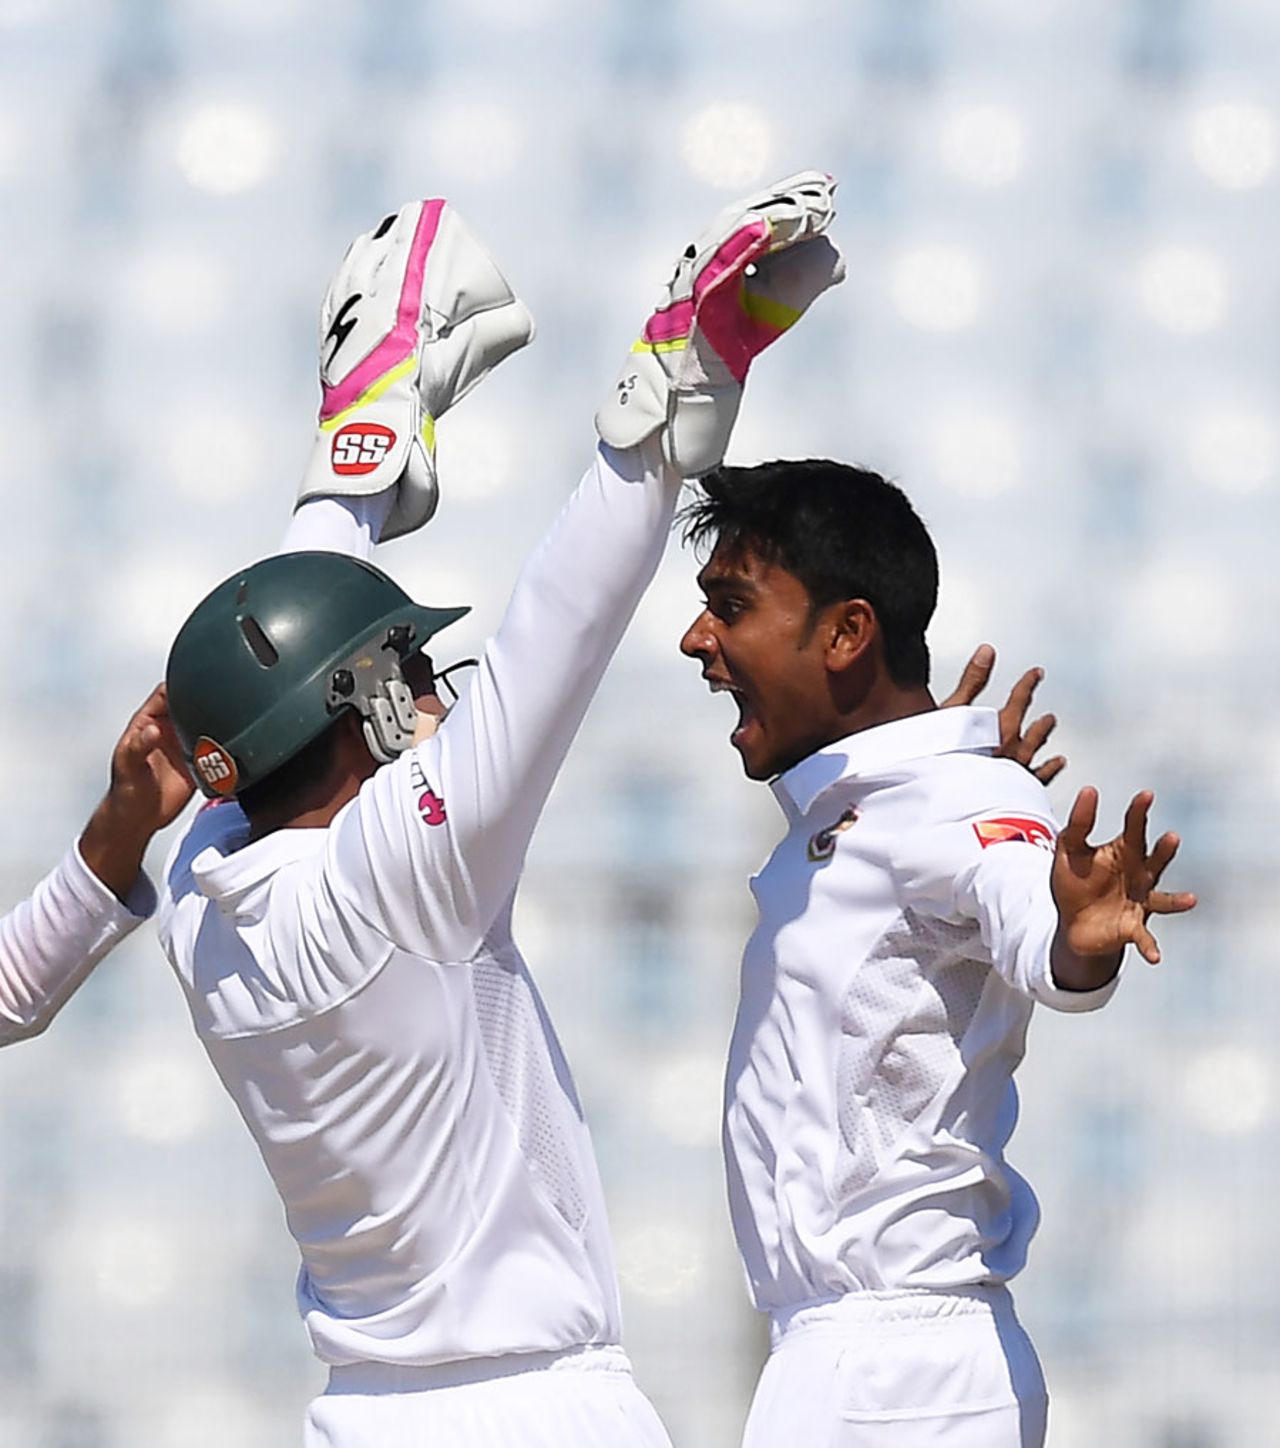 Mehedi Hasan enjoyed a fantastic first day in Test cricket, Bangladesh v England, 1st Test, Chittagong, 1st day, October 20, 2016